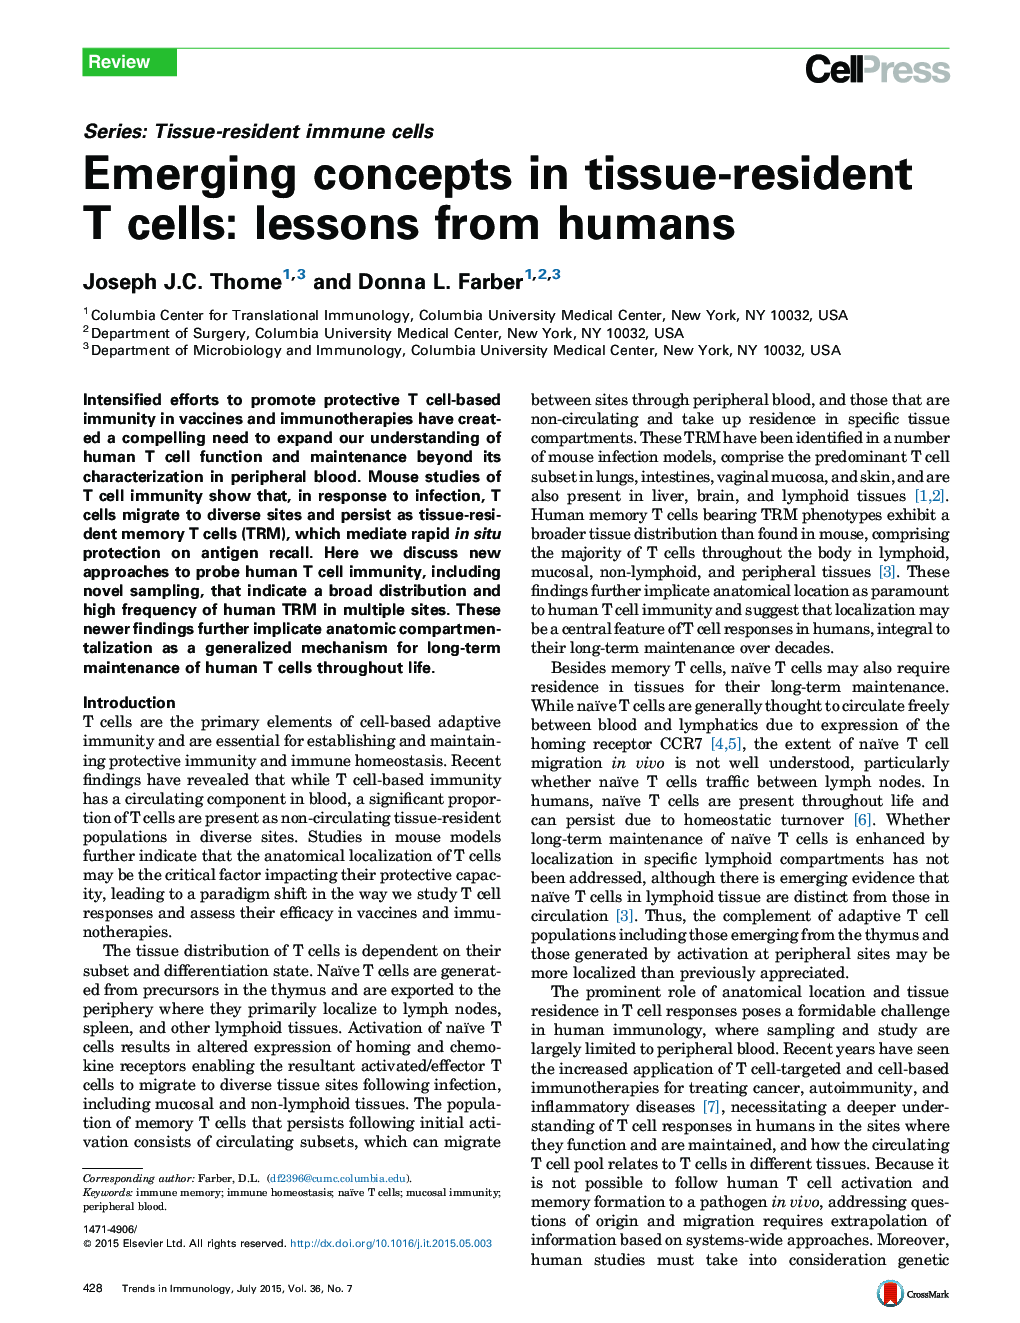 Emerging concepts in tissue-resident T cells: lessons from humans